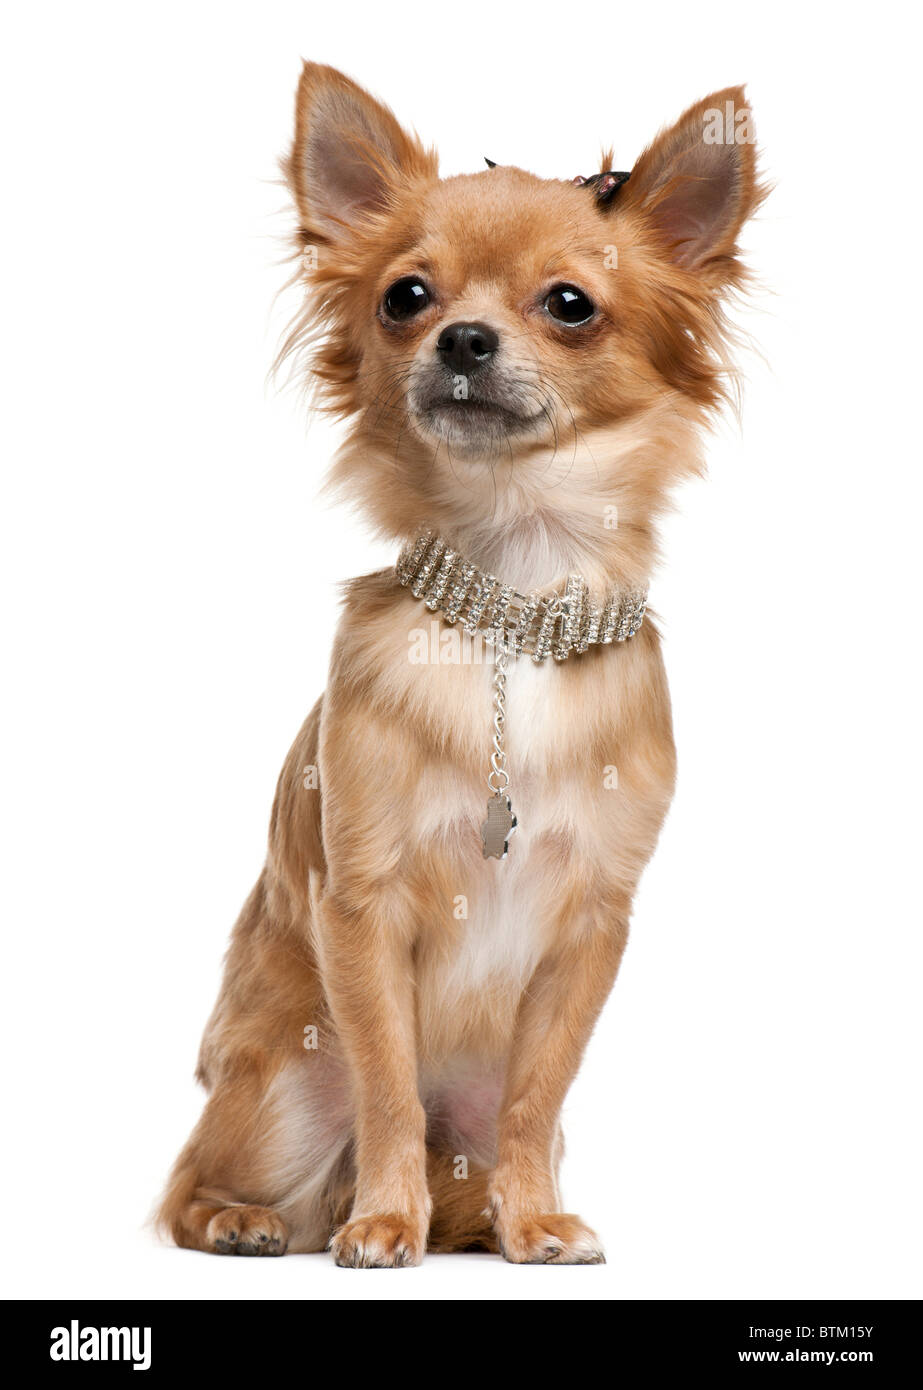 Chihuahua, 18 years old, in front of white background Banque D'Images